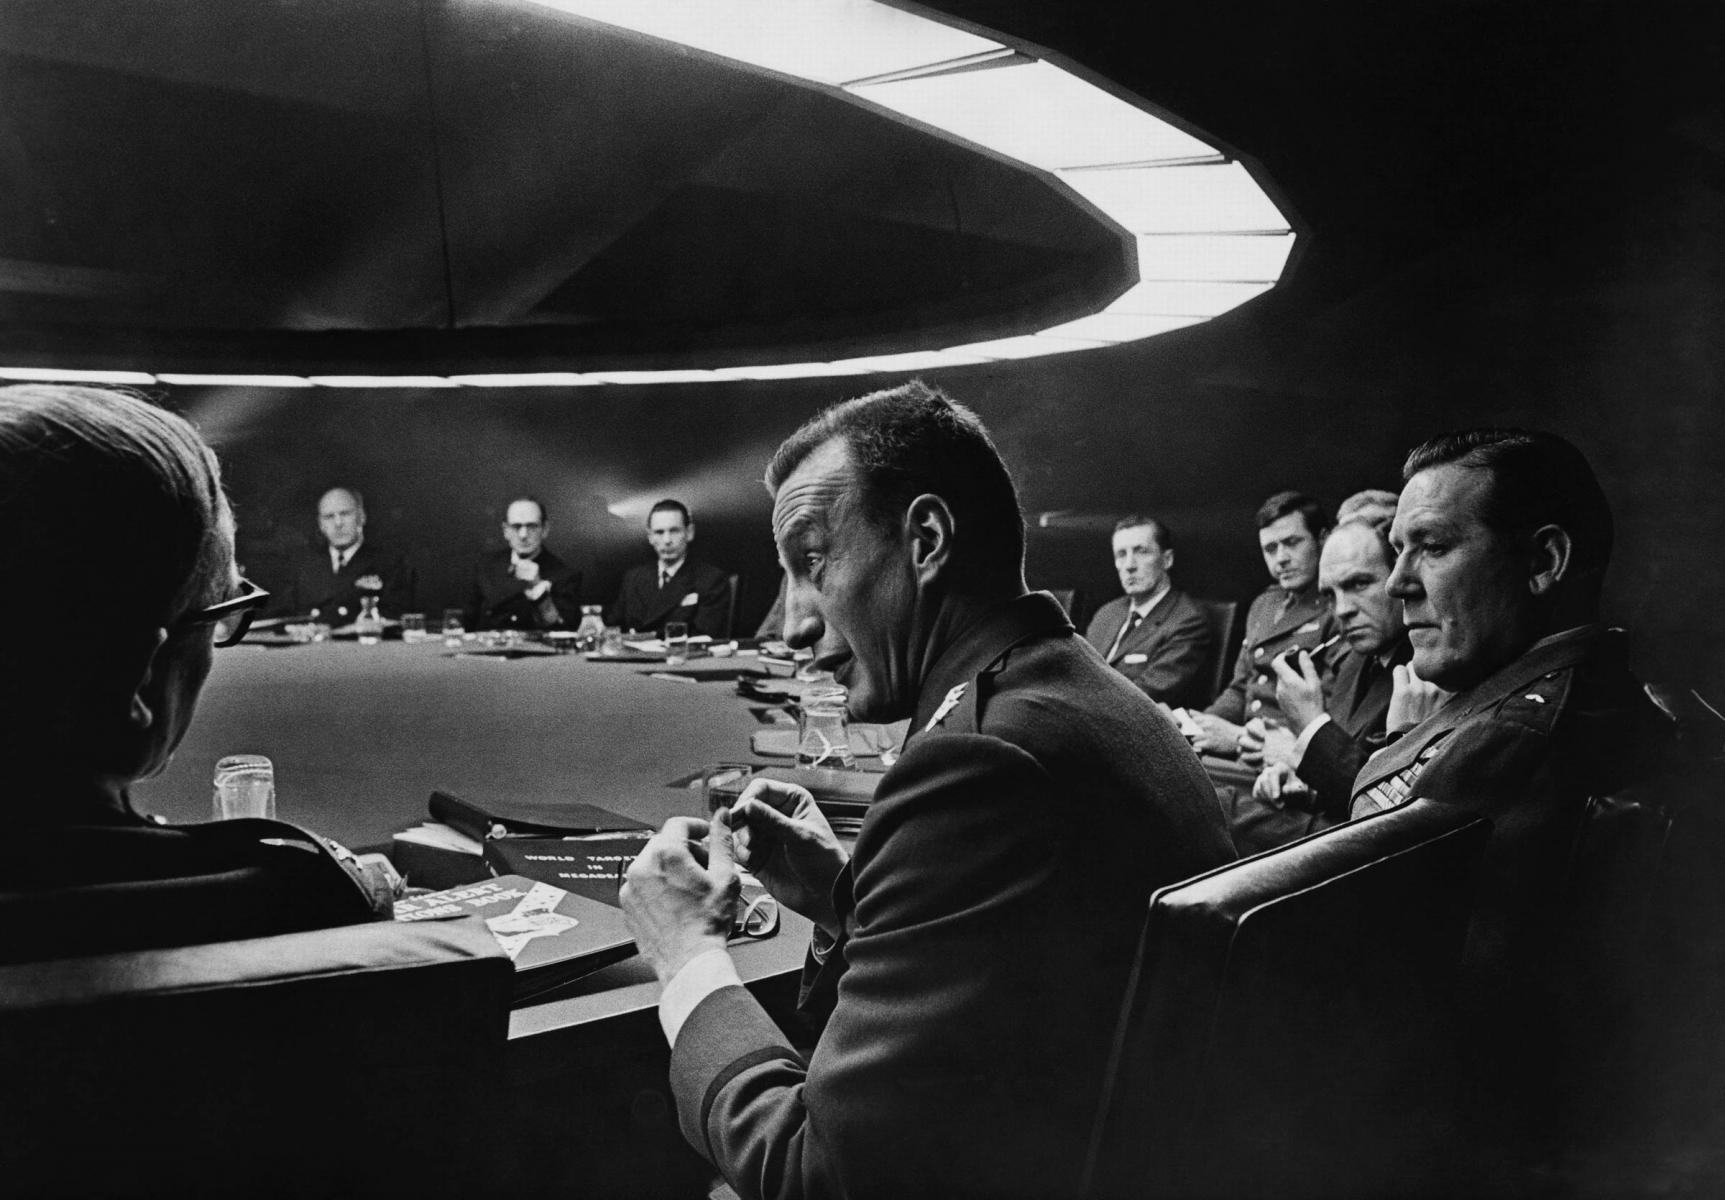 Dr. Strangelove, or How I Learned to Stop Worrying